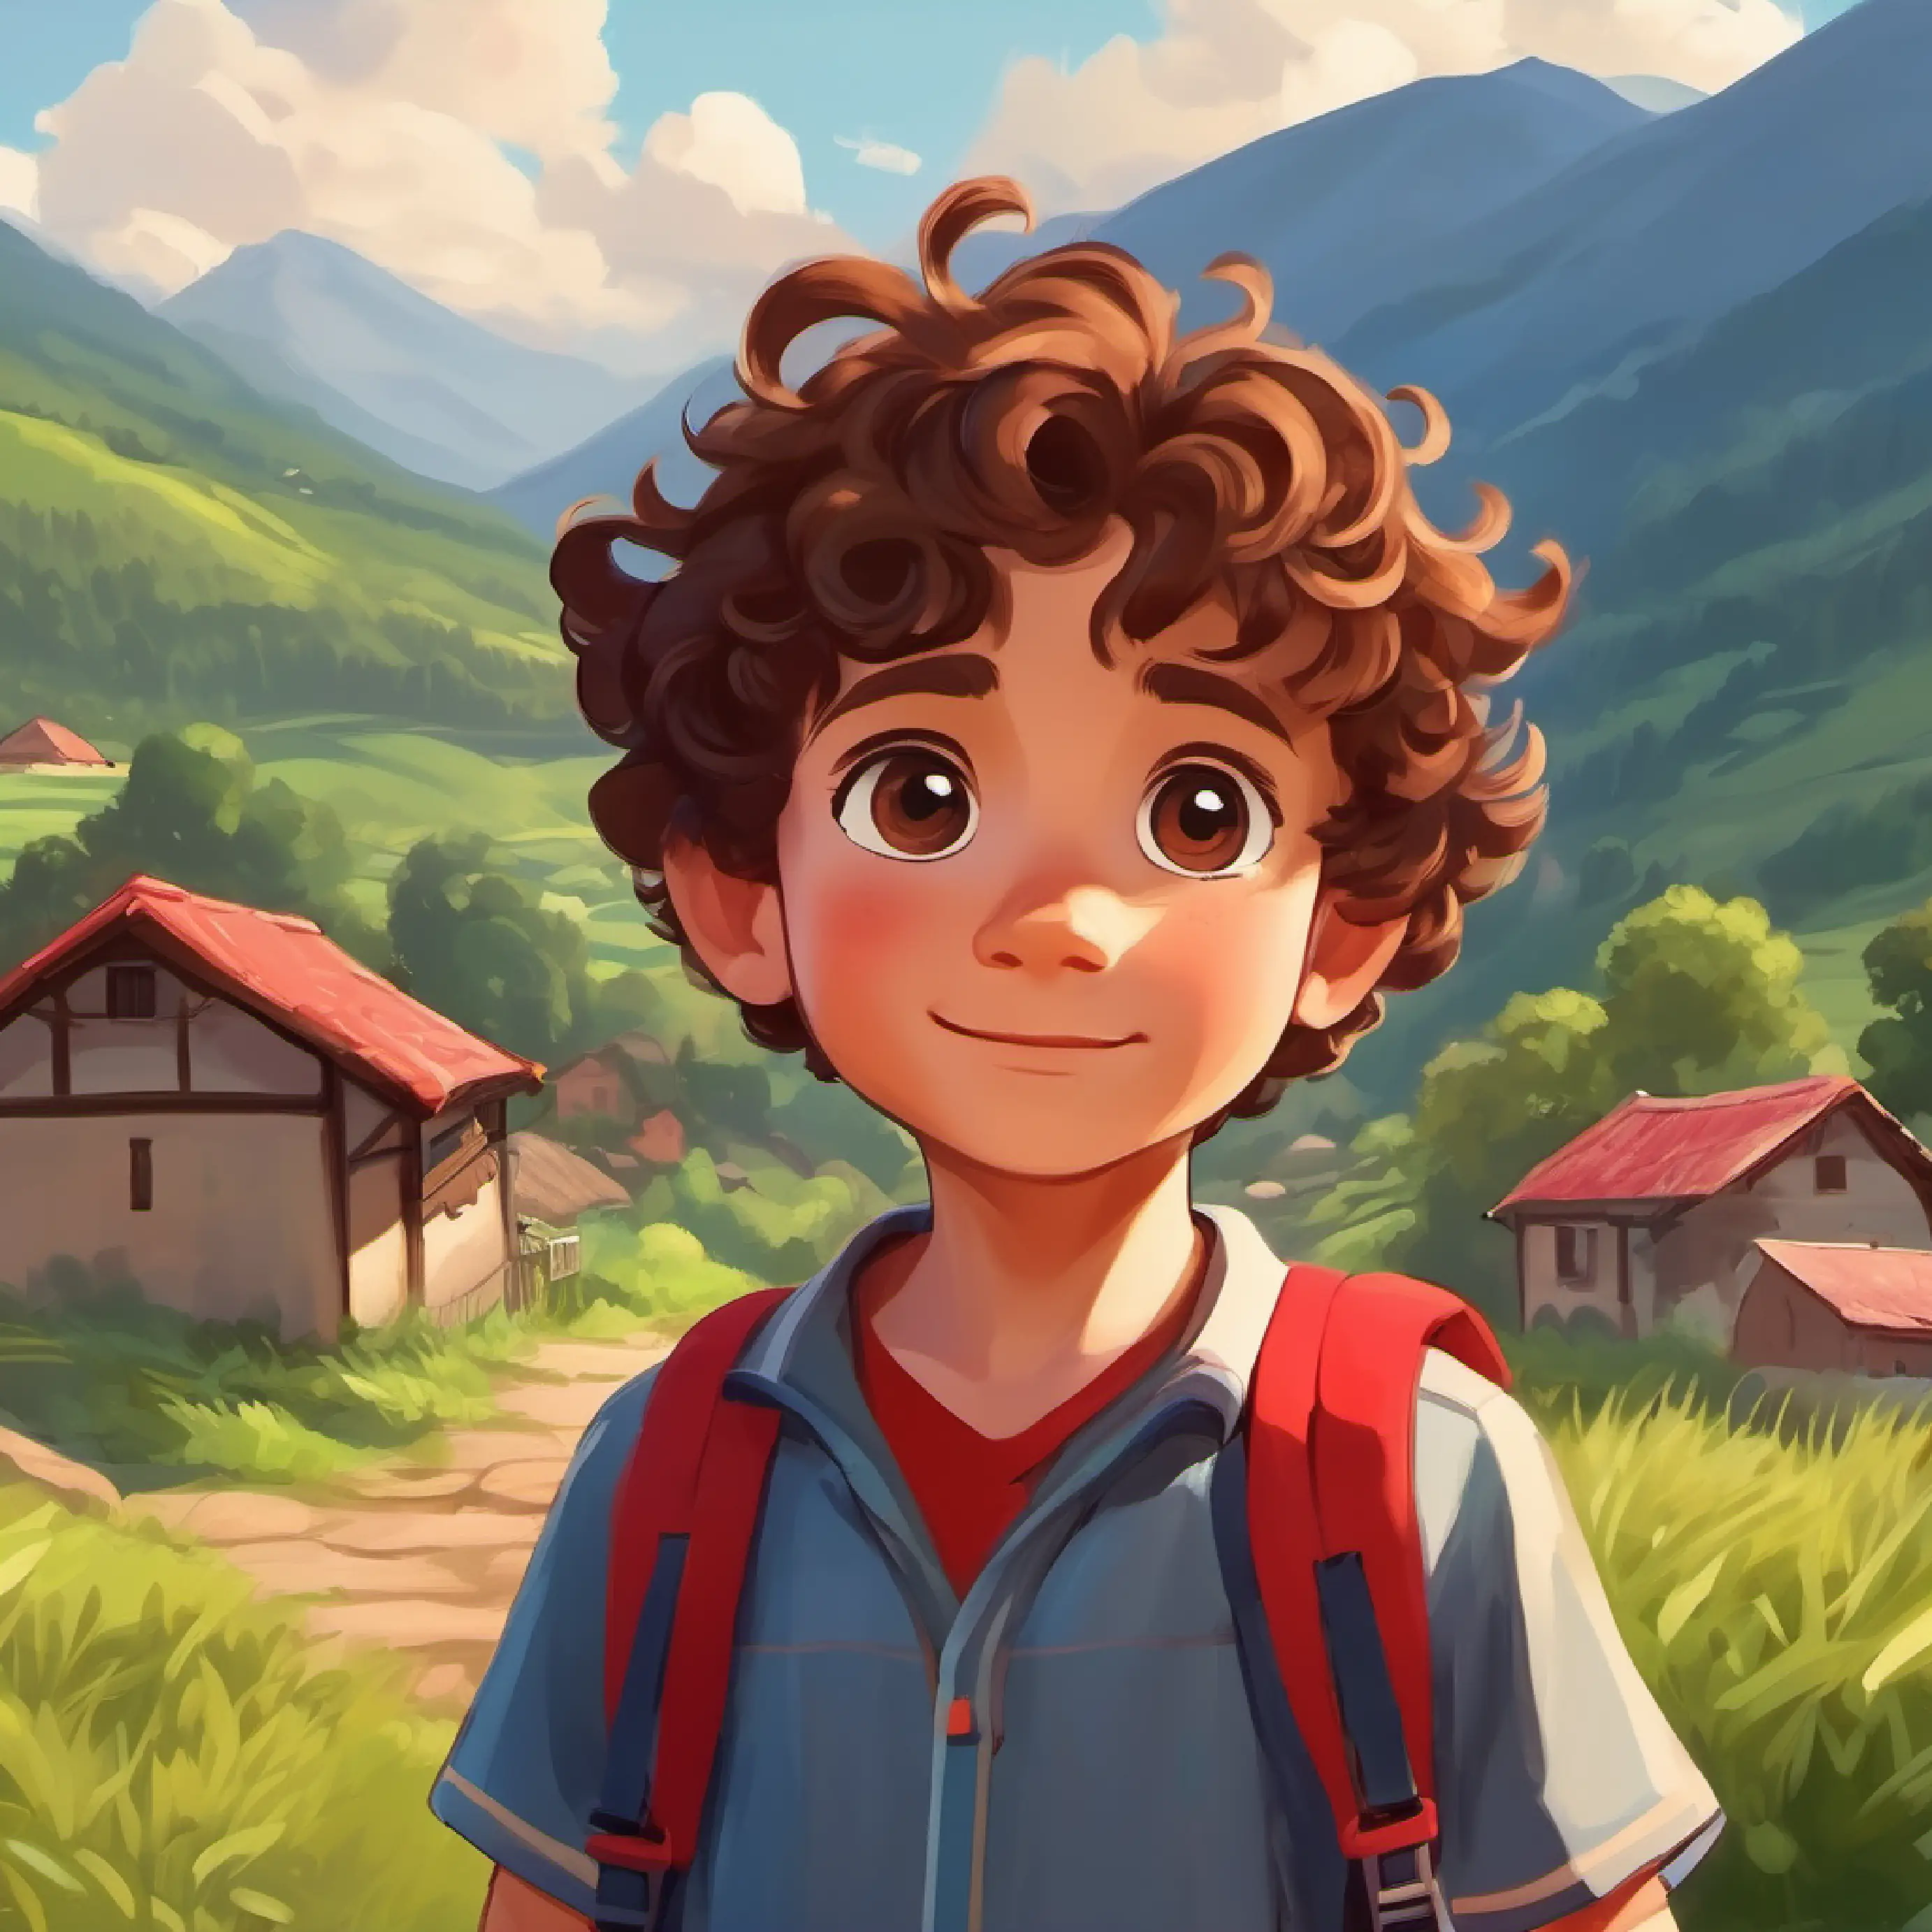 Introduction to A small boy, curly brown hair, bright brown eyes, always carrying a red backpack and his fear, in a village with mountains